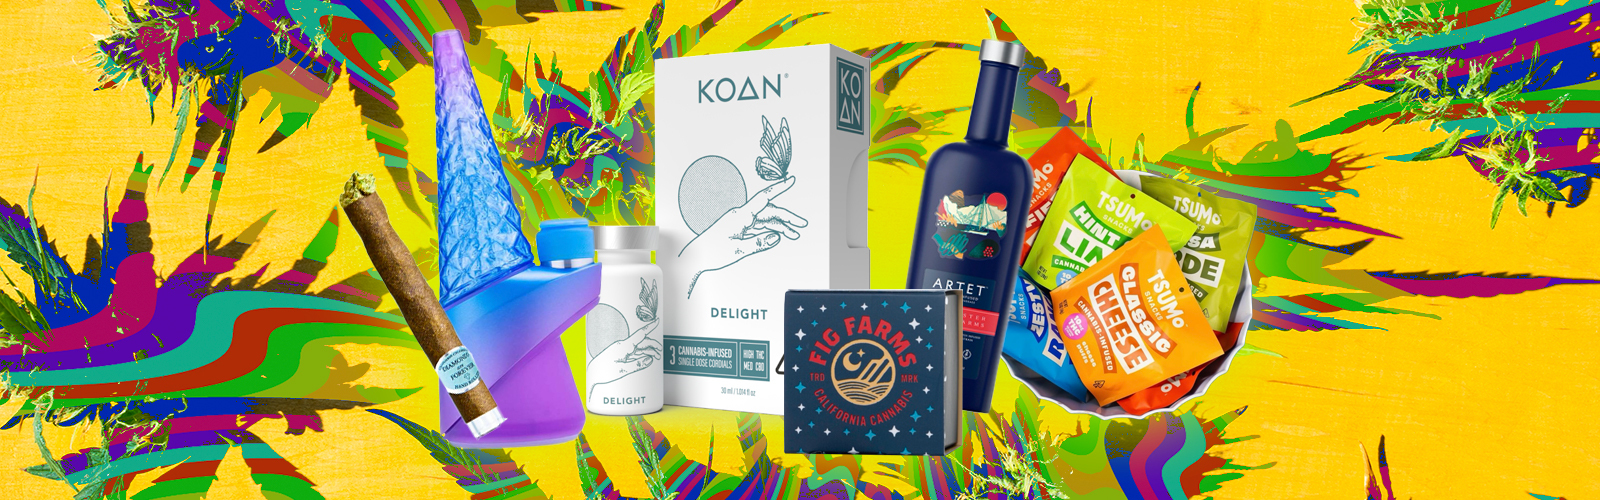 10 Best Weed Products At Hall Of Flowers Cannabis Expo